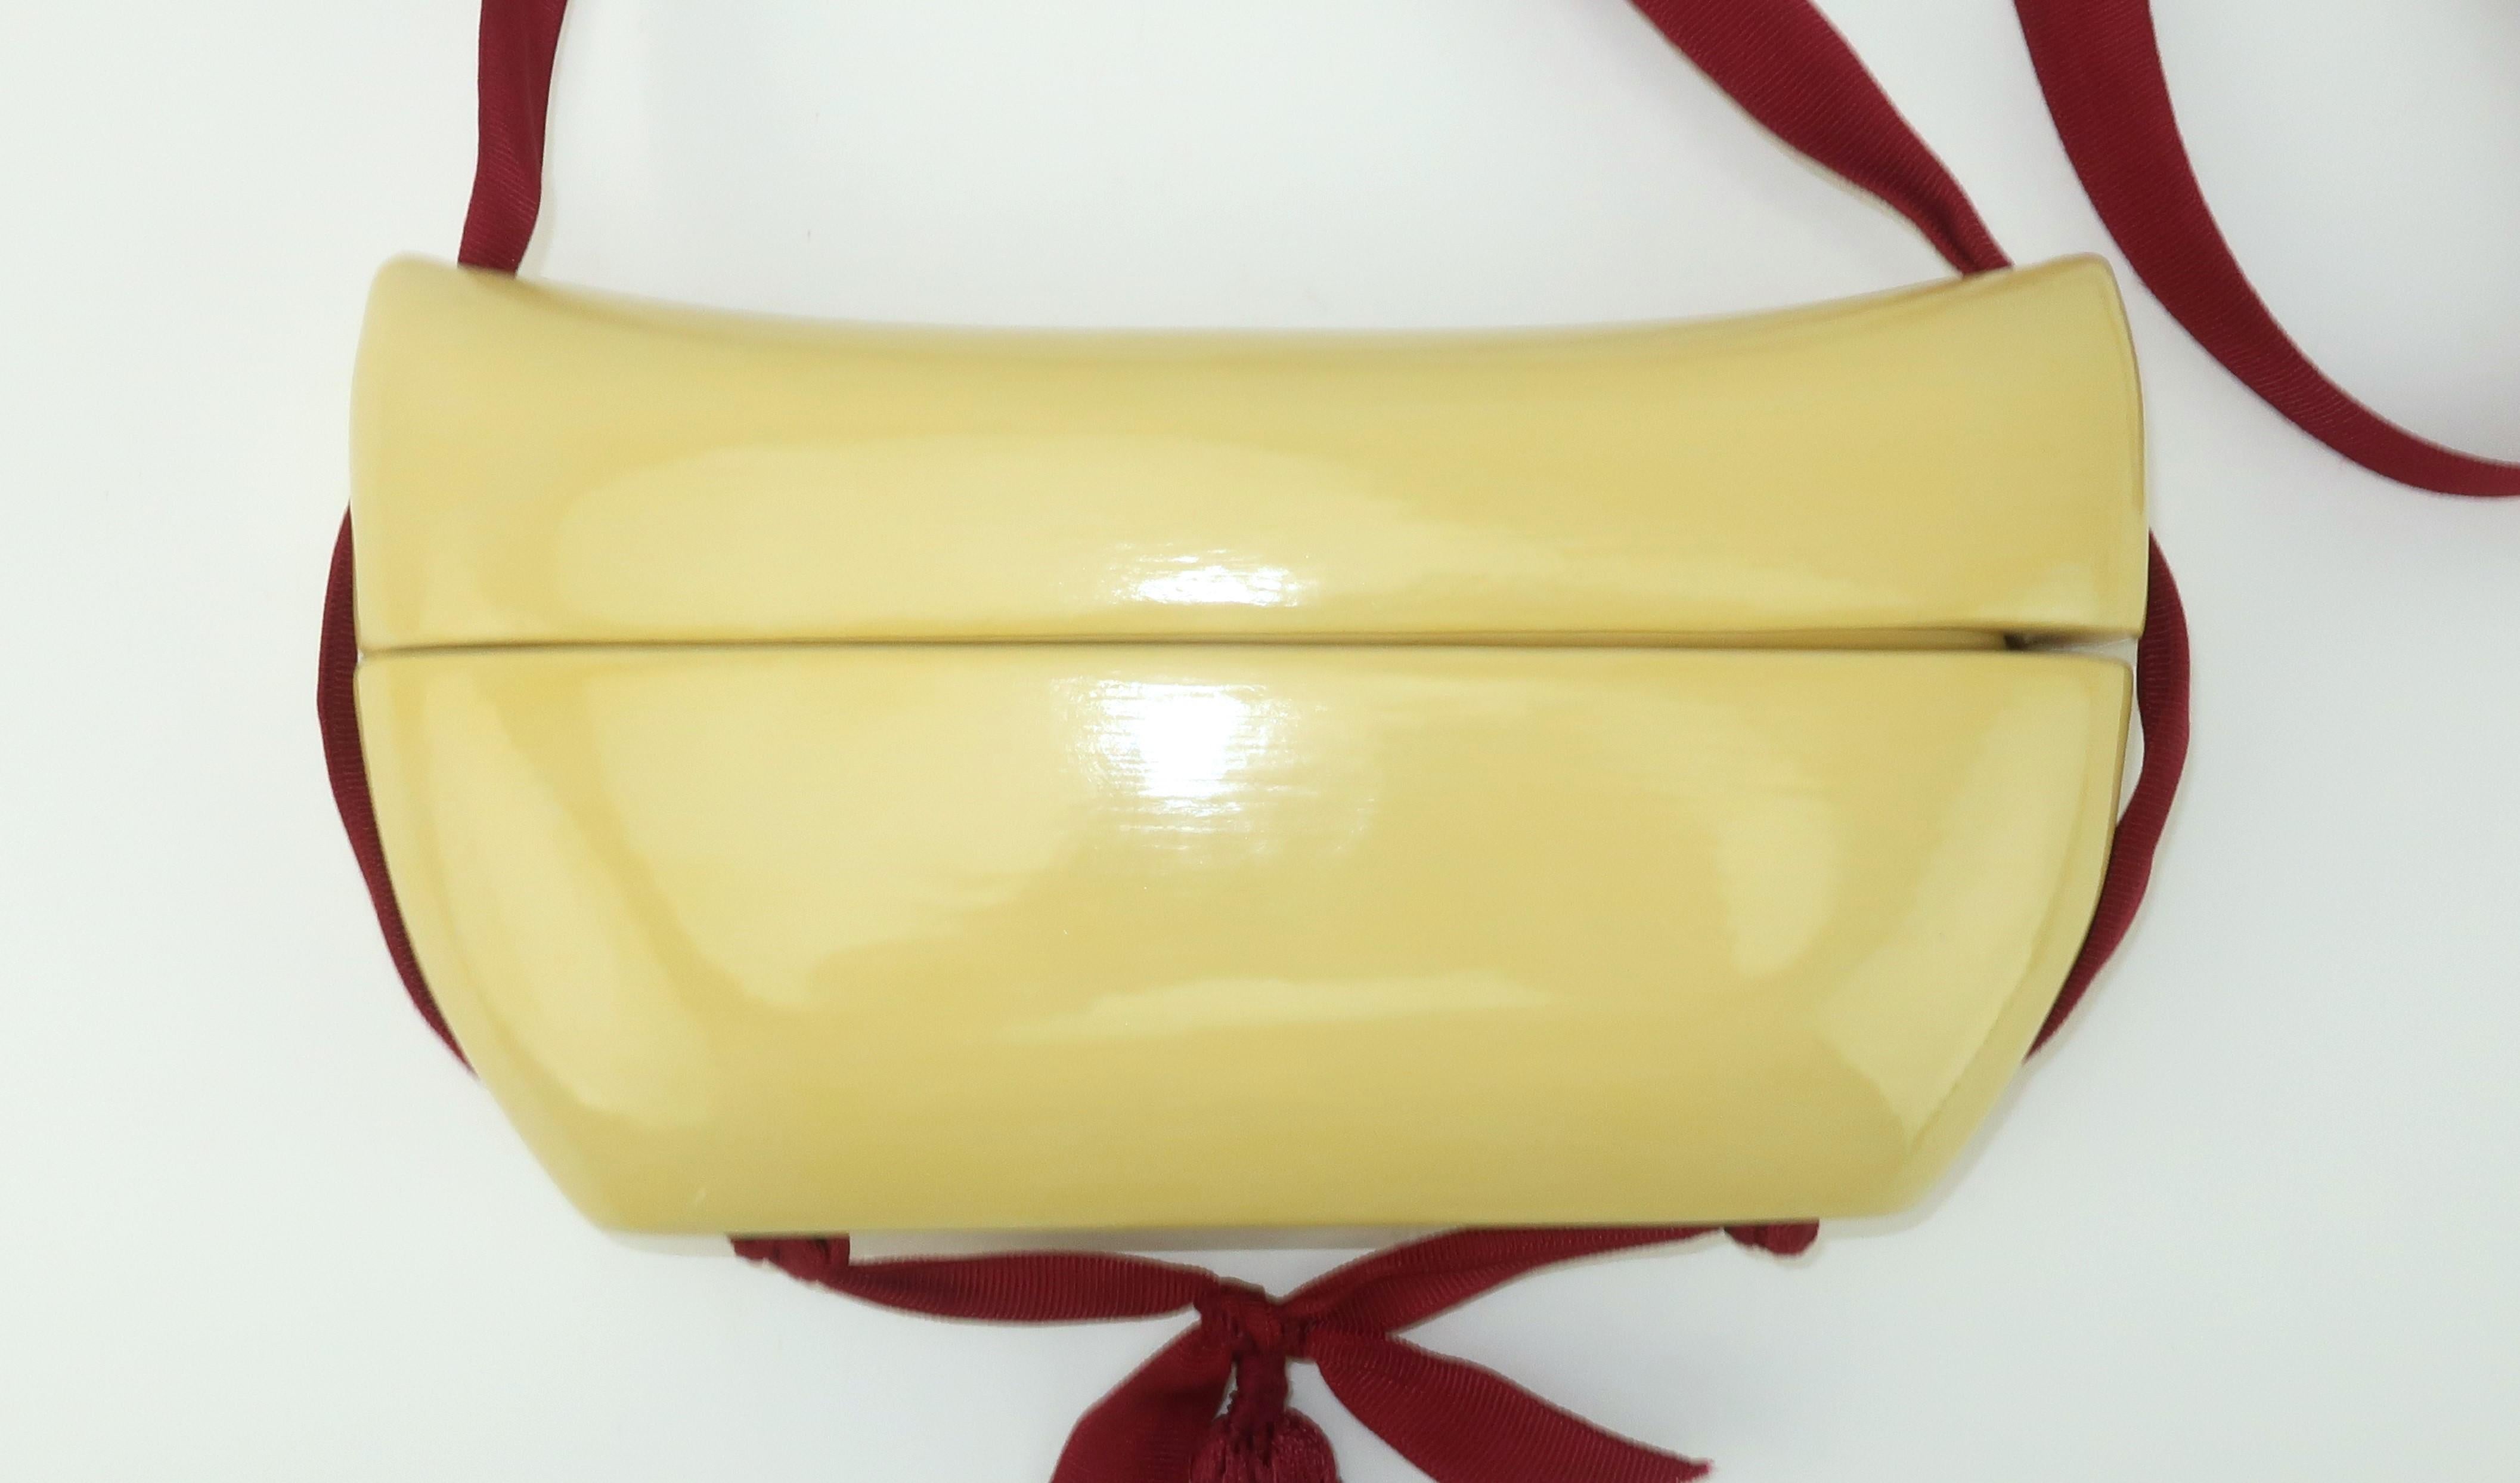 1980's lacquered wood box handbag with an Asian style design in an ivory white shade accented by a burgundy grosgrain ribbon shoulder strap.  The top of the handbag slides up to access the interior and the grosgrain shoulder strap is anchored by a